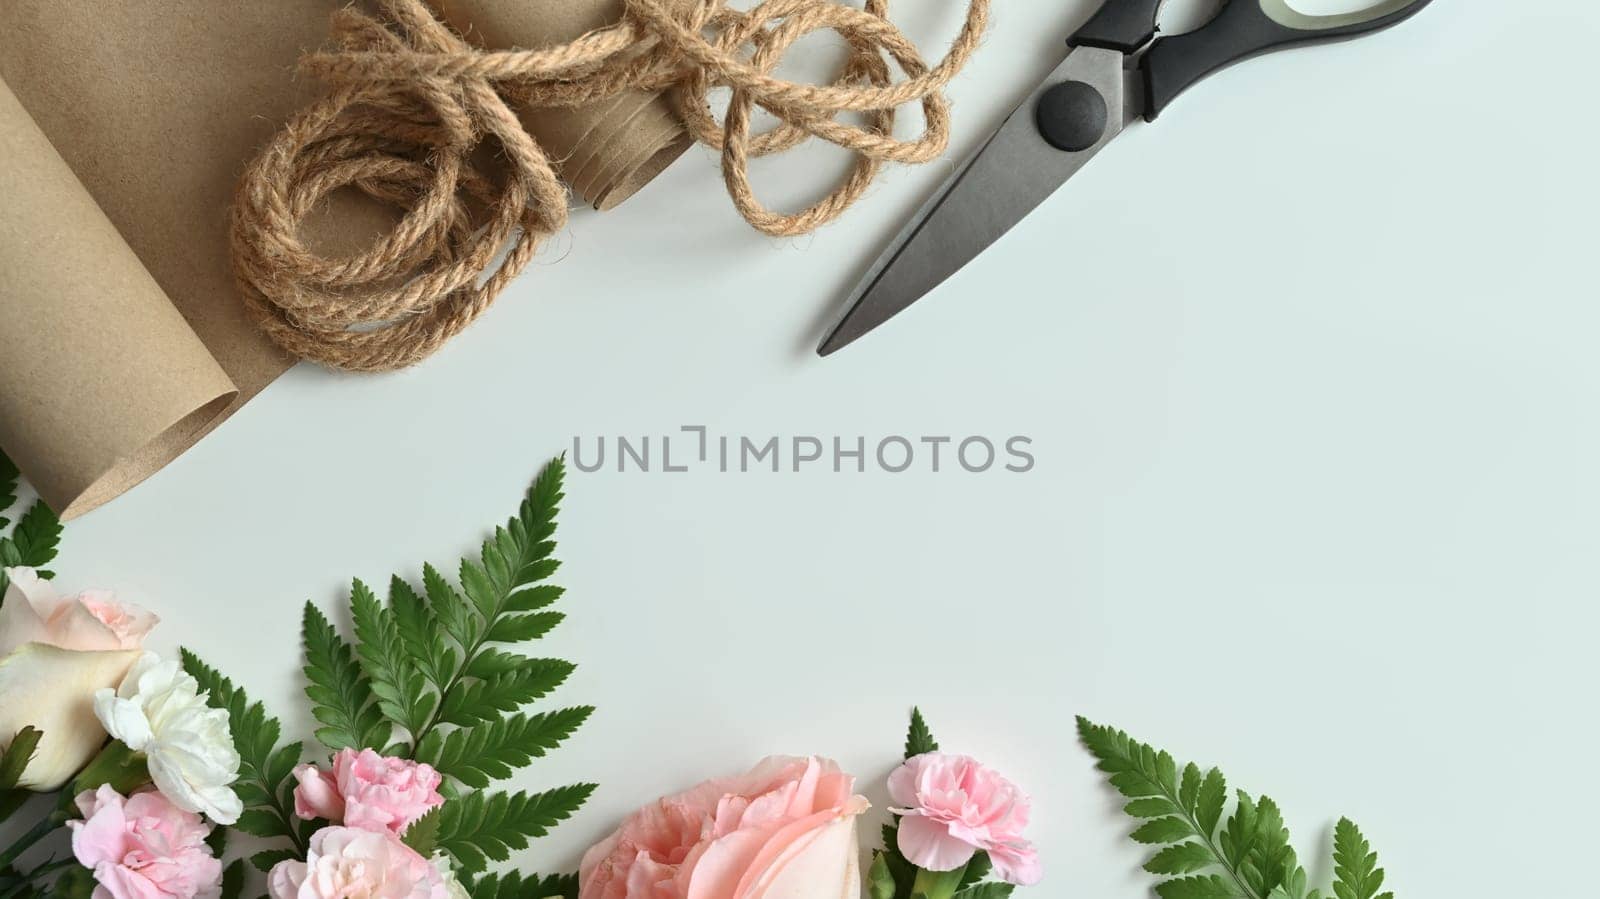 Florist equipment with fresh flowers on white background. Flat lay, top view with copy space.